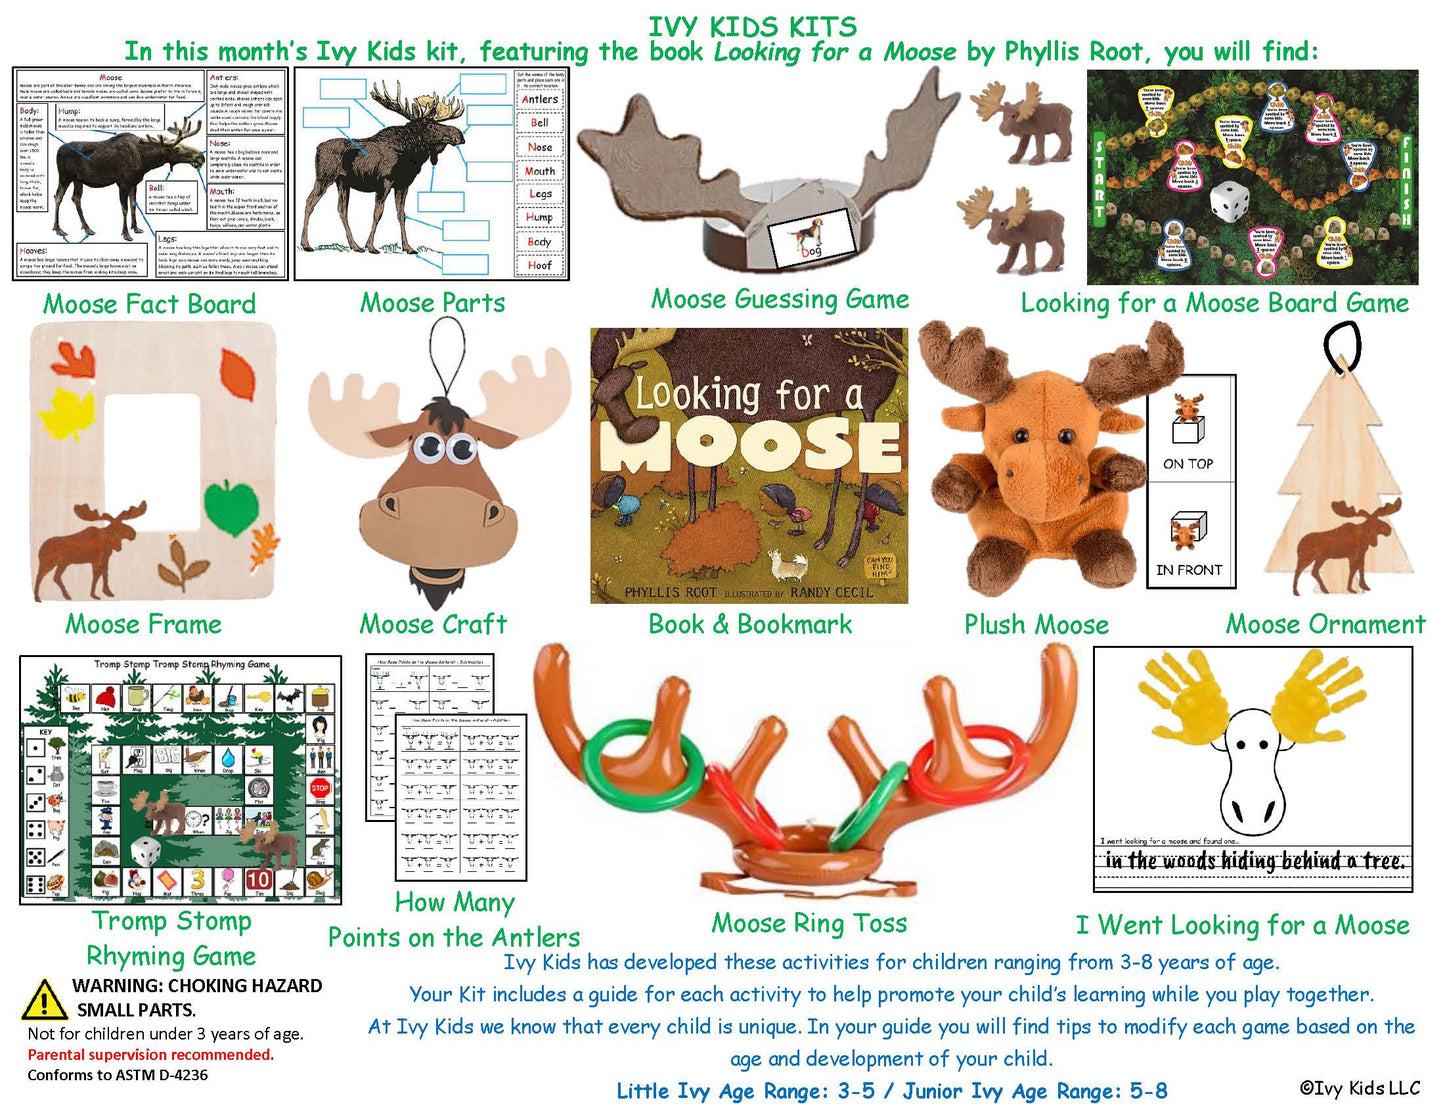 Moose themed activities inspired by Looking for a Moose Book